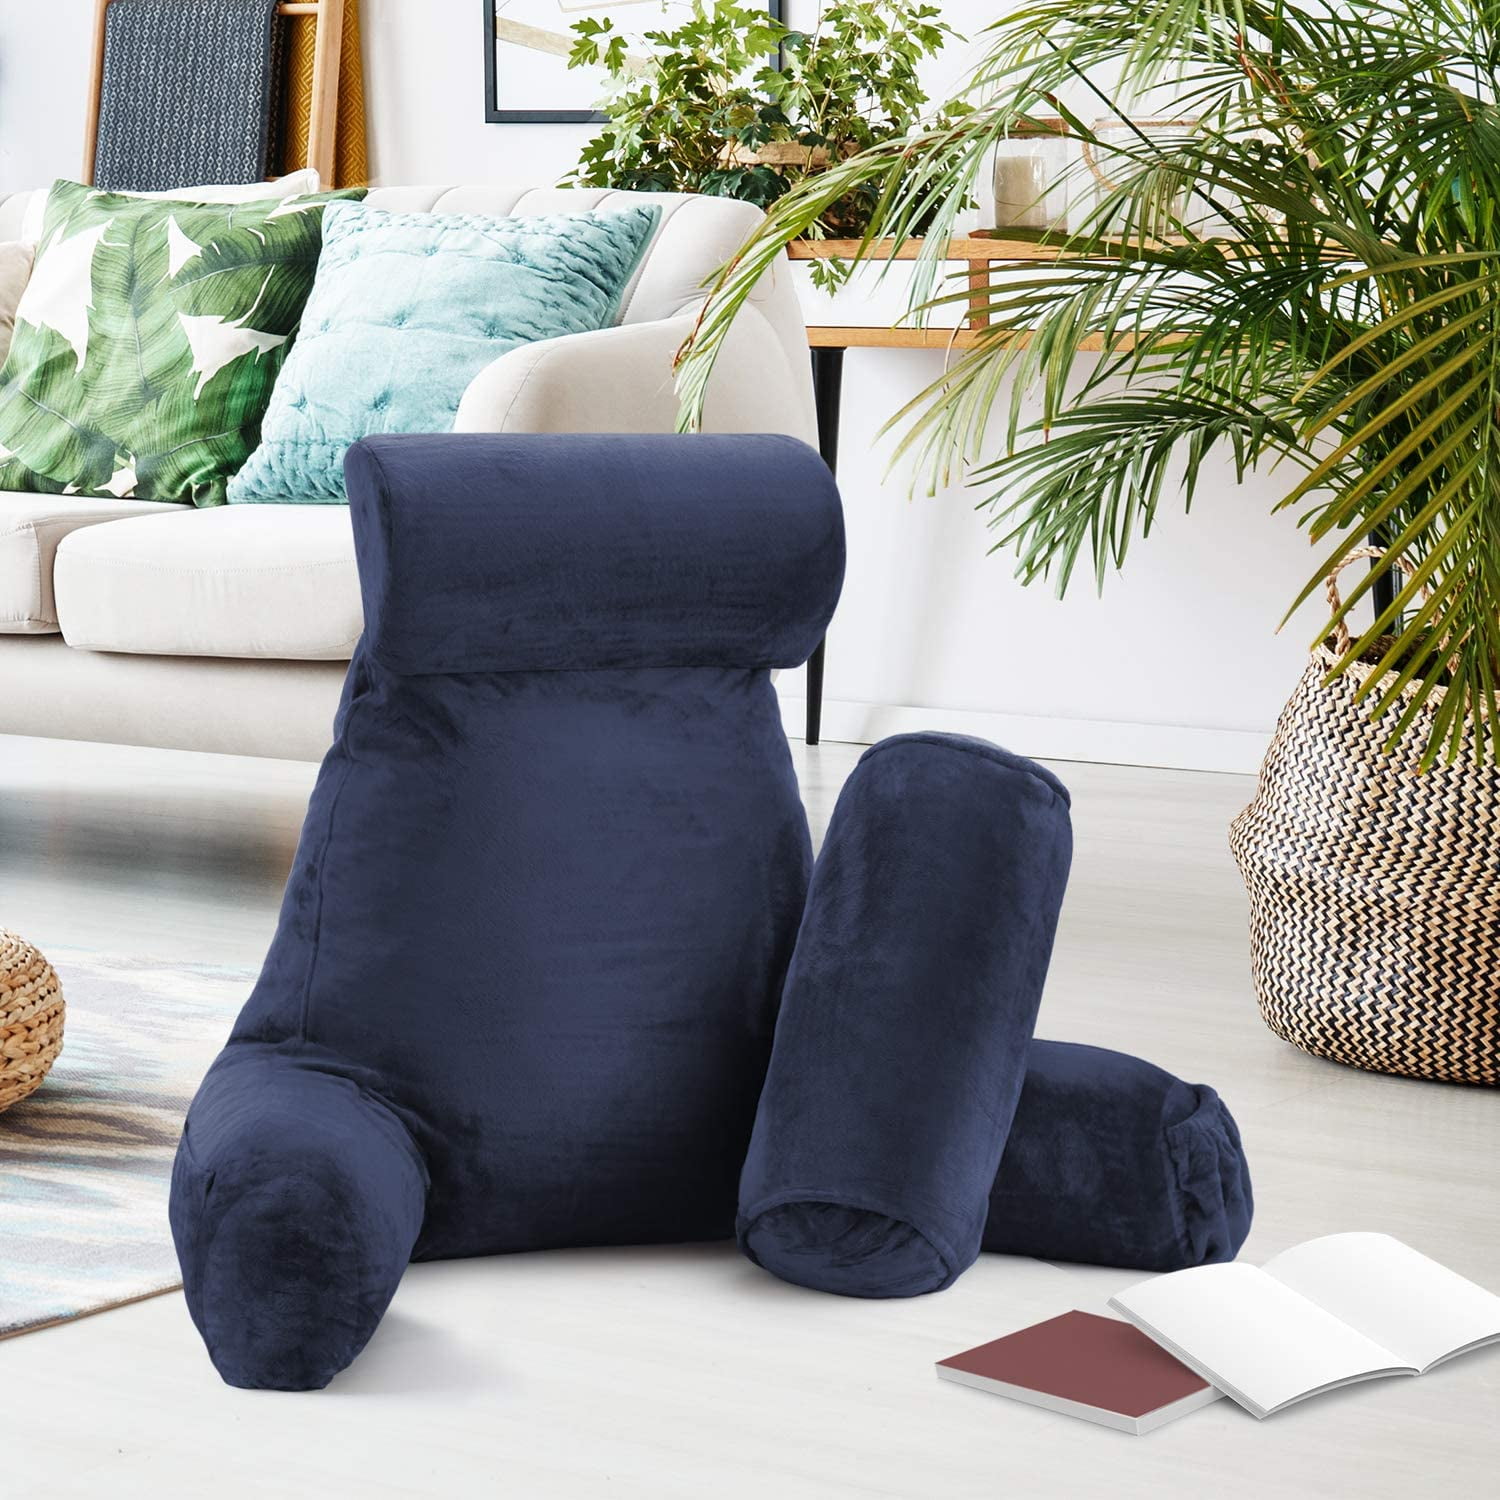 Bed Rest Lounger Backrest Armrest Plush Pillow TV Gaming Couch Cushion Comfort 